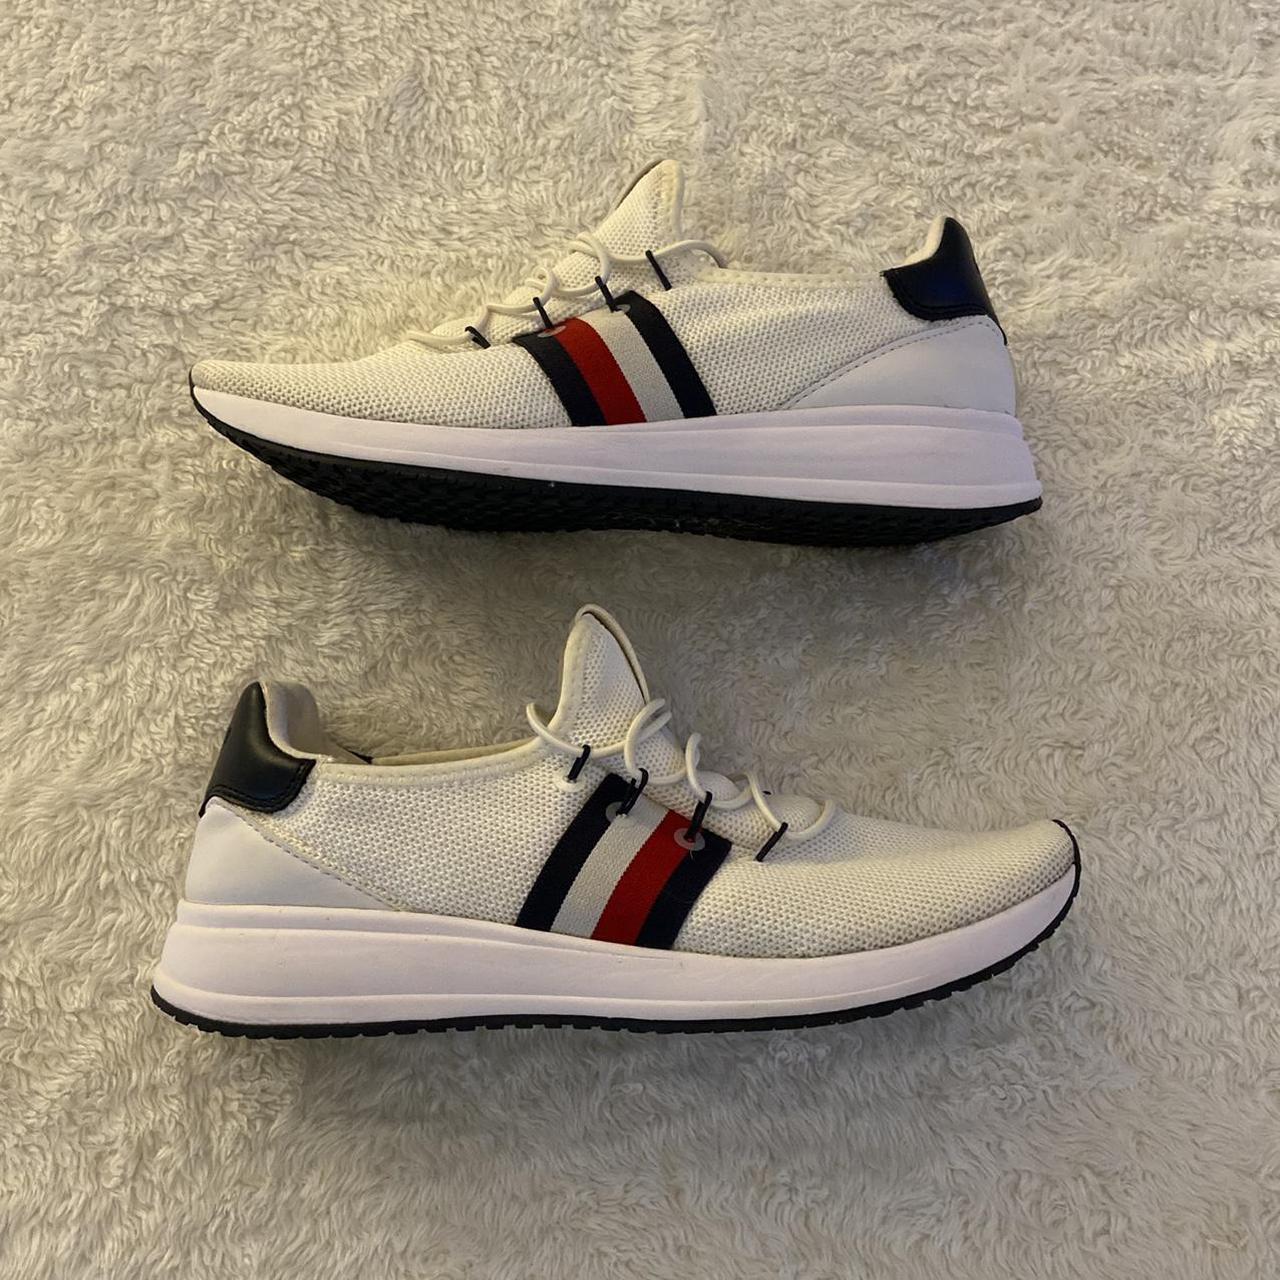 Product Image 2 - White Tommy Hilfiger Sneaker Shoes

Size